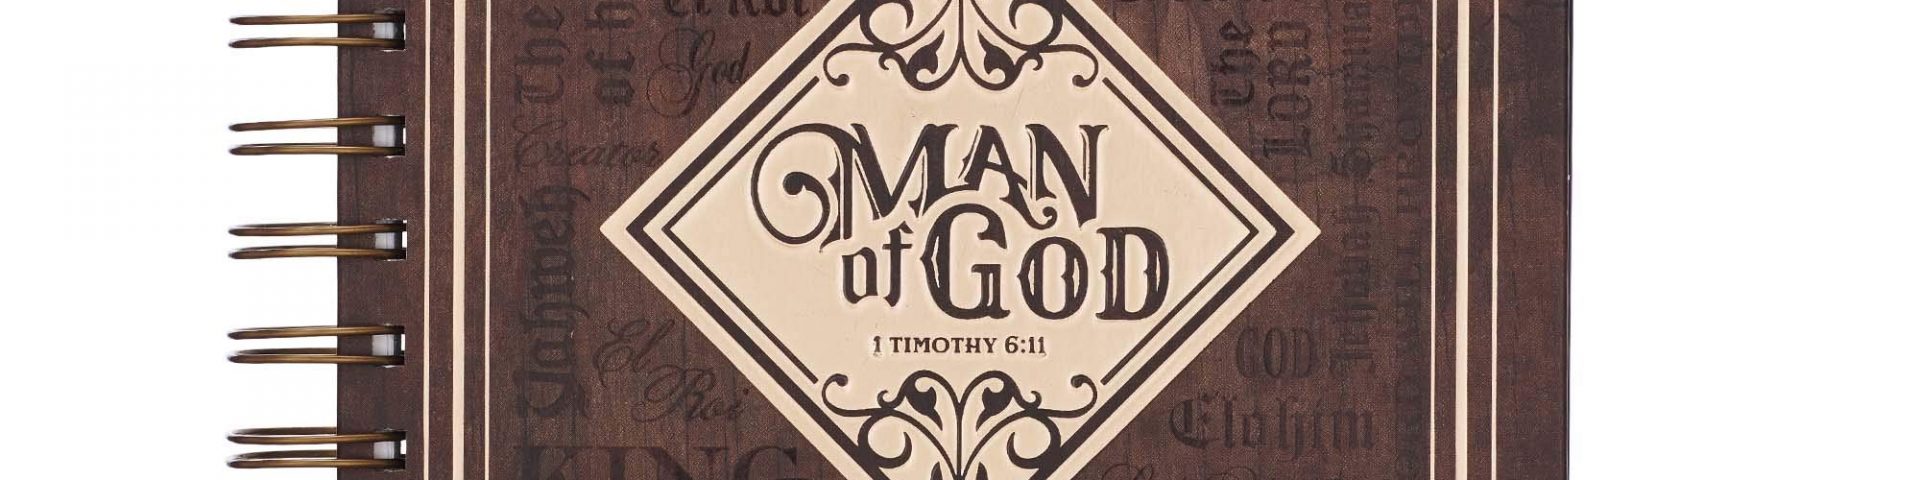 Christian Art Gifts Journal w/Scripture Man of God 1 Timothy 6:11 Bible Verse Names of God Brown 192 Ruled Pages, Large Hardcover Notebook, Wire Bound